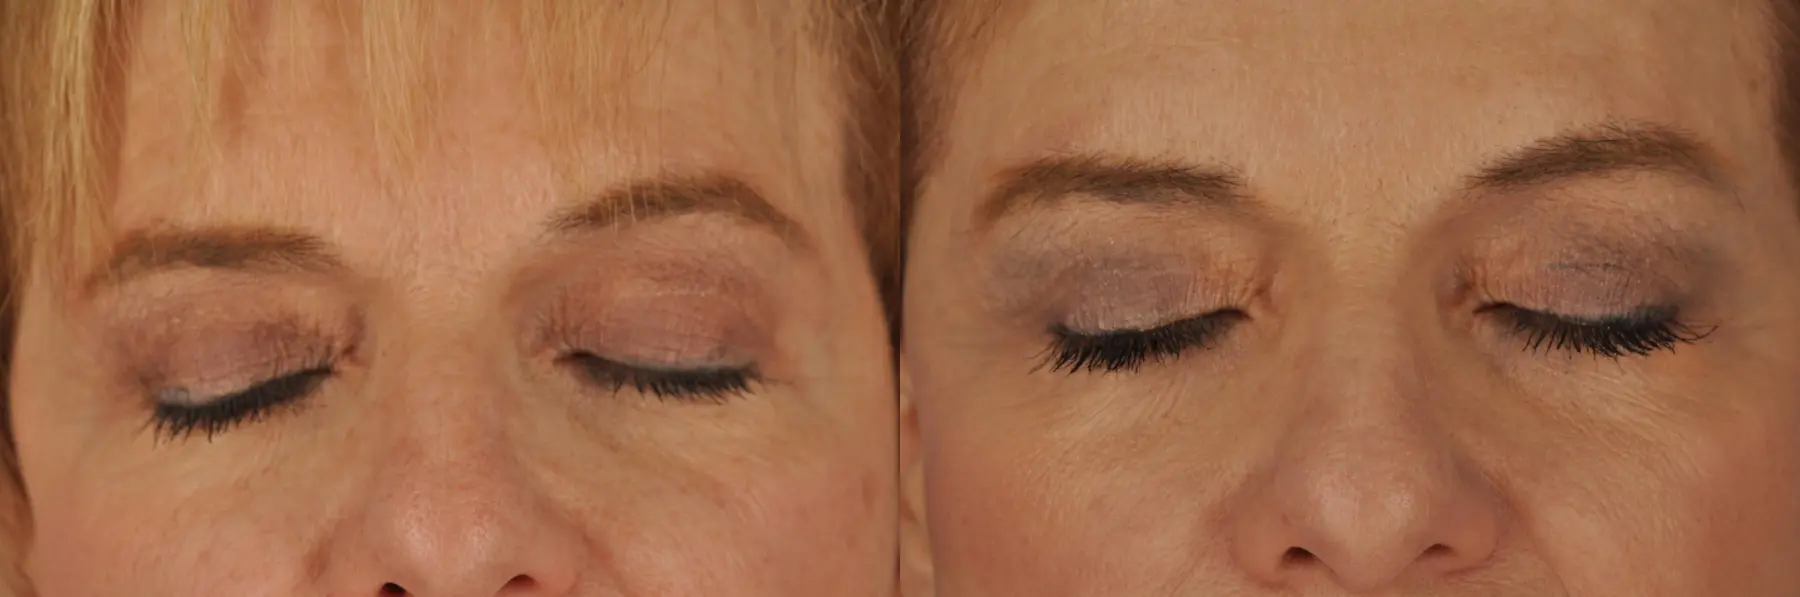 68 year old woman, revision blepharoplasty - Before and After 2